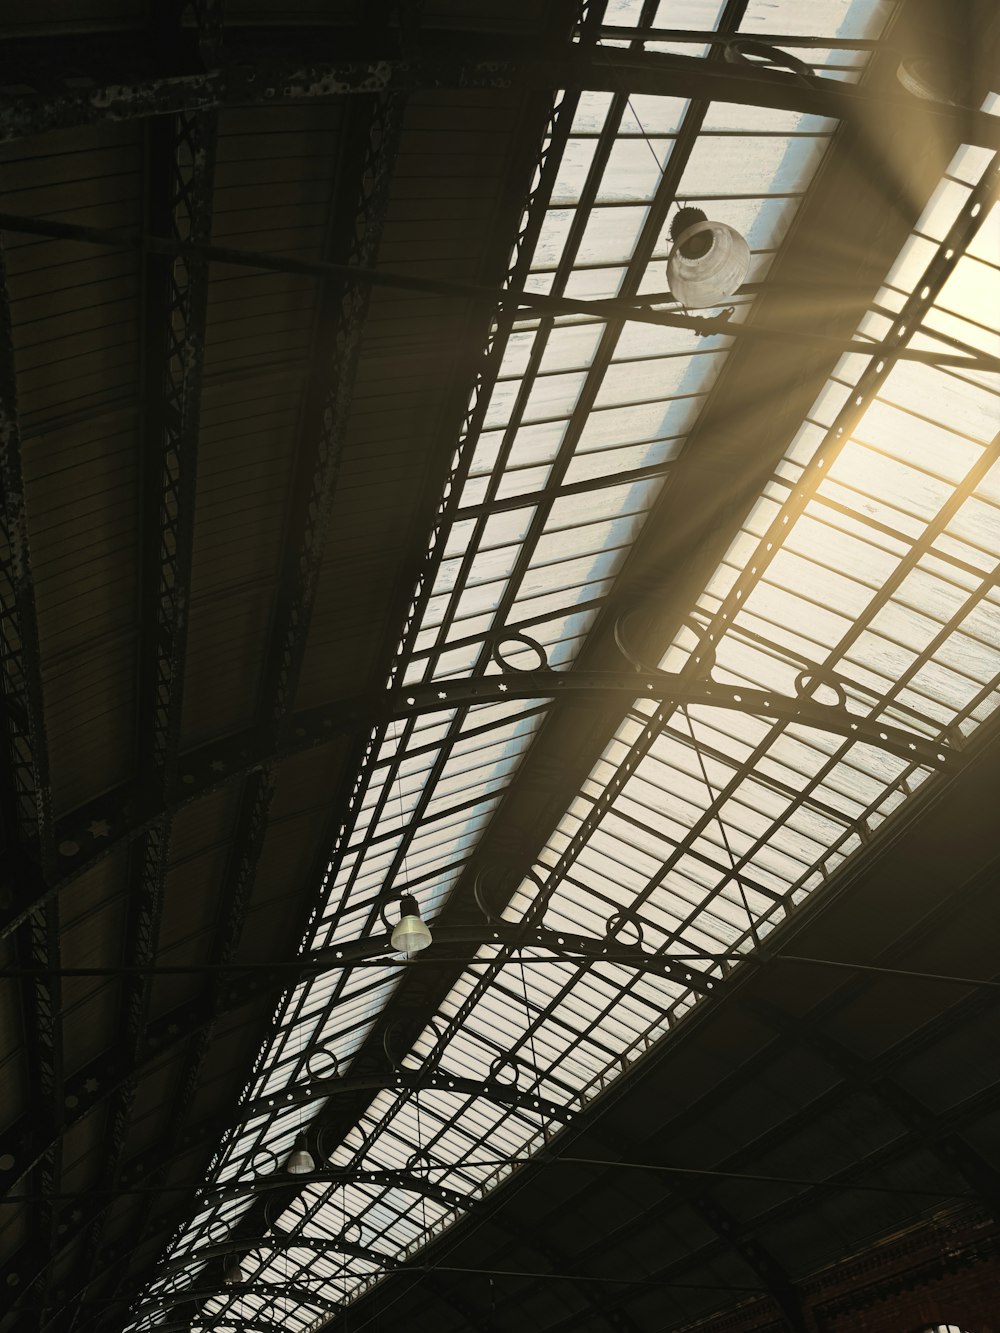 the sun is shining through the roof of a train station